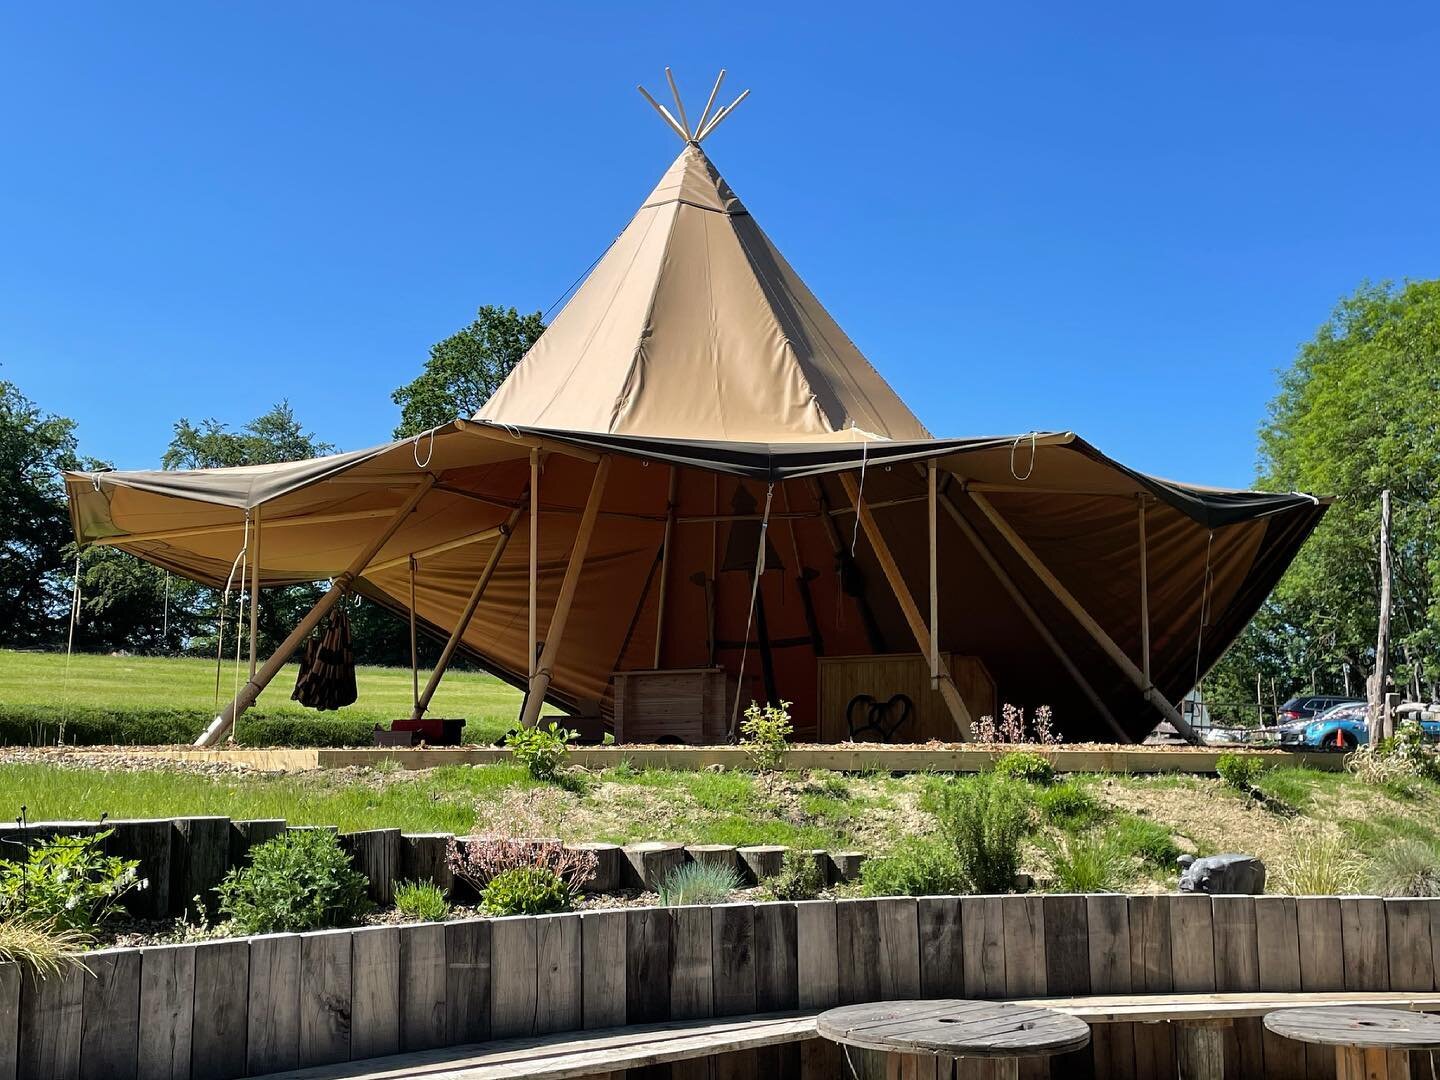 𝒪𝒶𝓀𝓉𝓇𝑒𝑒 𝐵𝒶𝓇𝓃

We went to check out the new Tipi at Oaktree today !! It is STUNNING and a great addition to what is already a magnificent venue ! We can already imagine the fun and games ahead in this bad boy !!!

Bring it on ! 
@oaktreebar